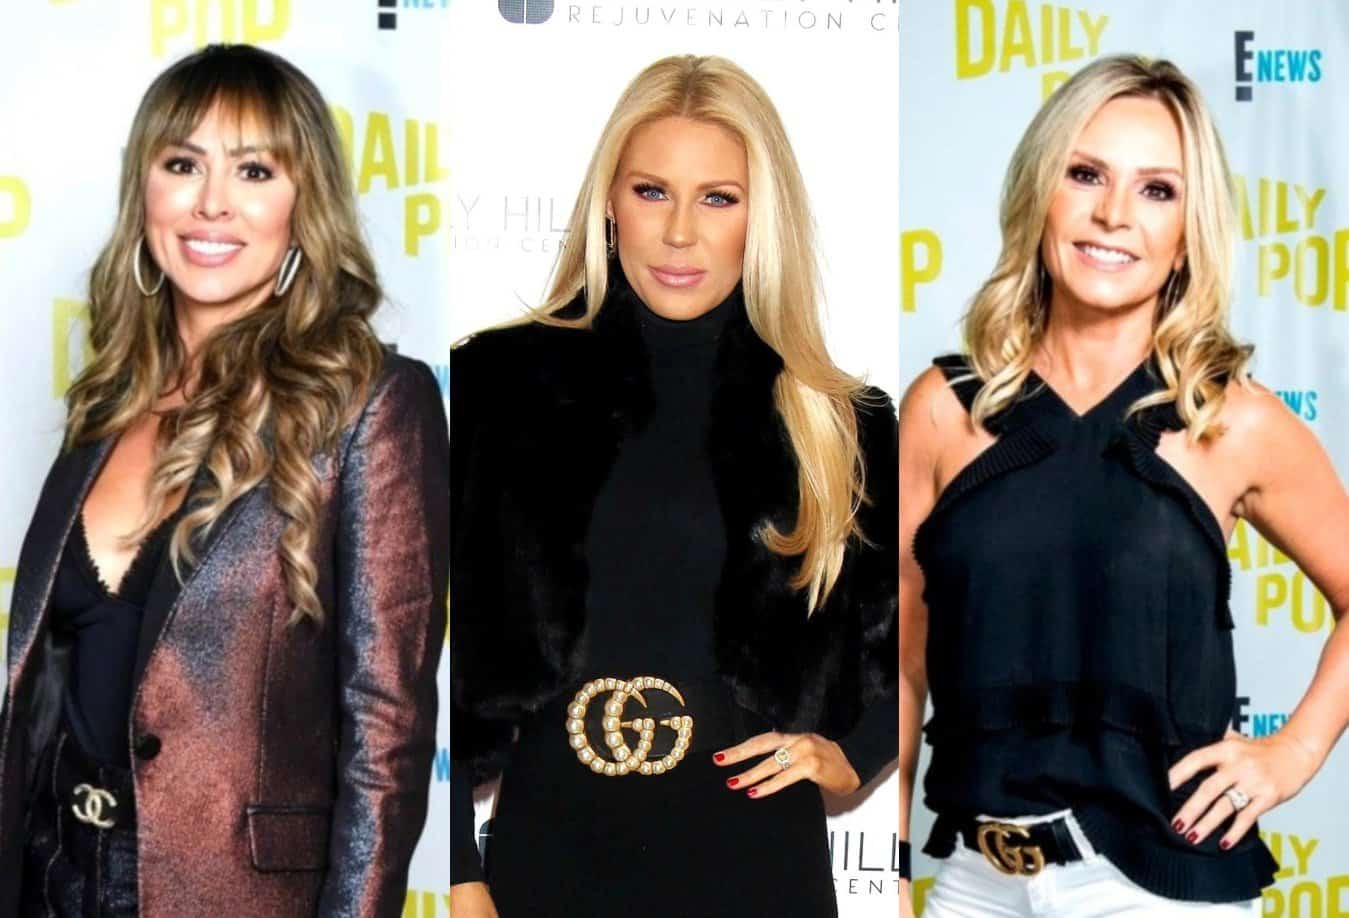 RHOC's Kelly Dodd and Gretchen Rossi React to Tamra Judge's Departure With a Couple of Very Shady Celebratory Videos